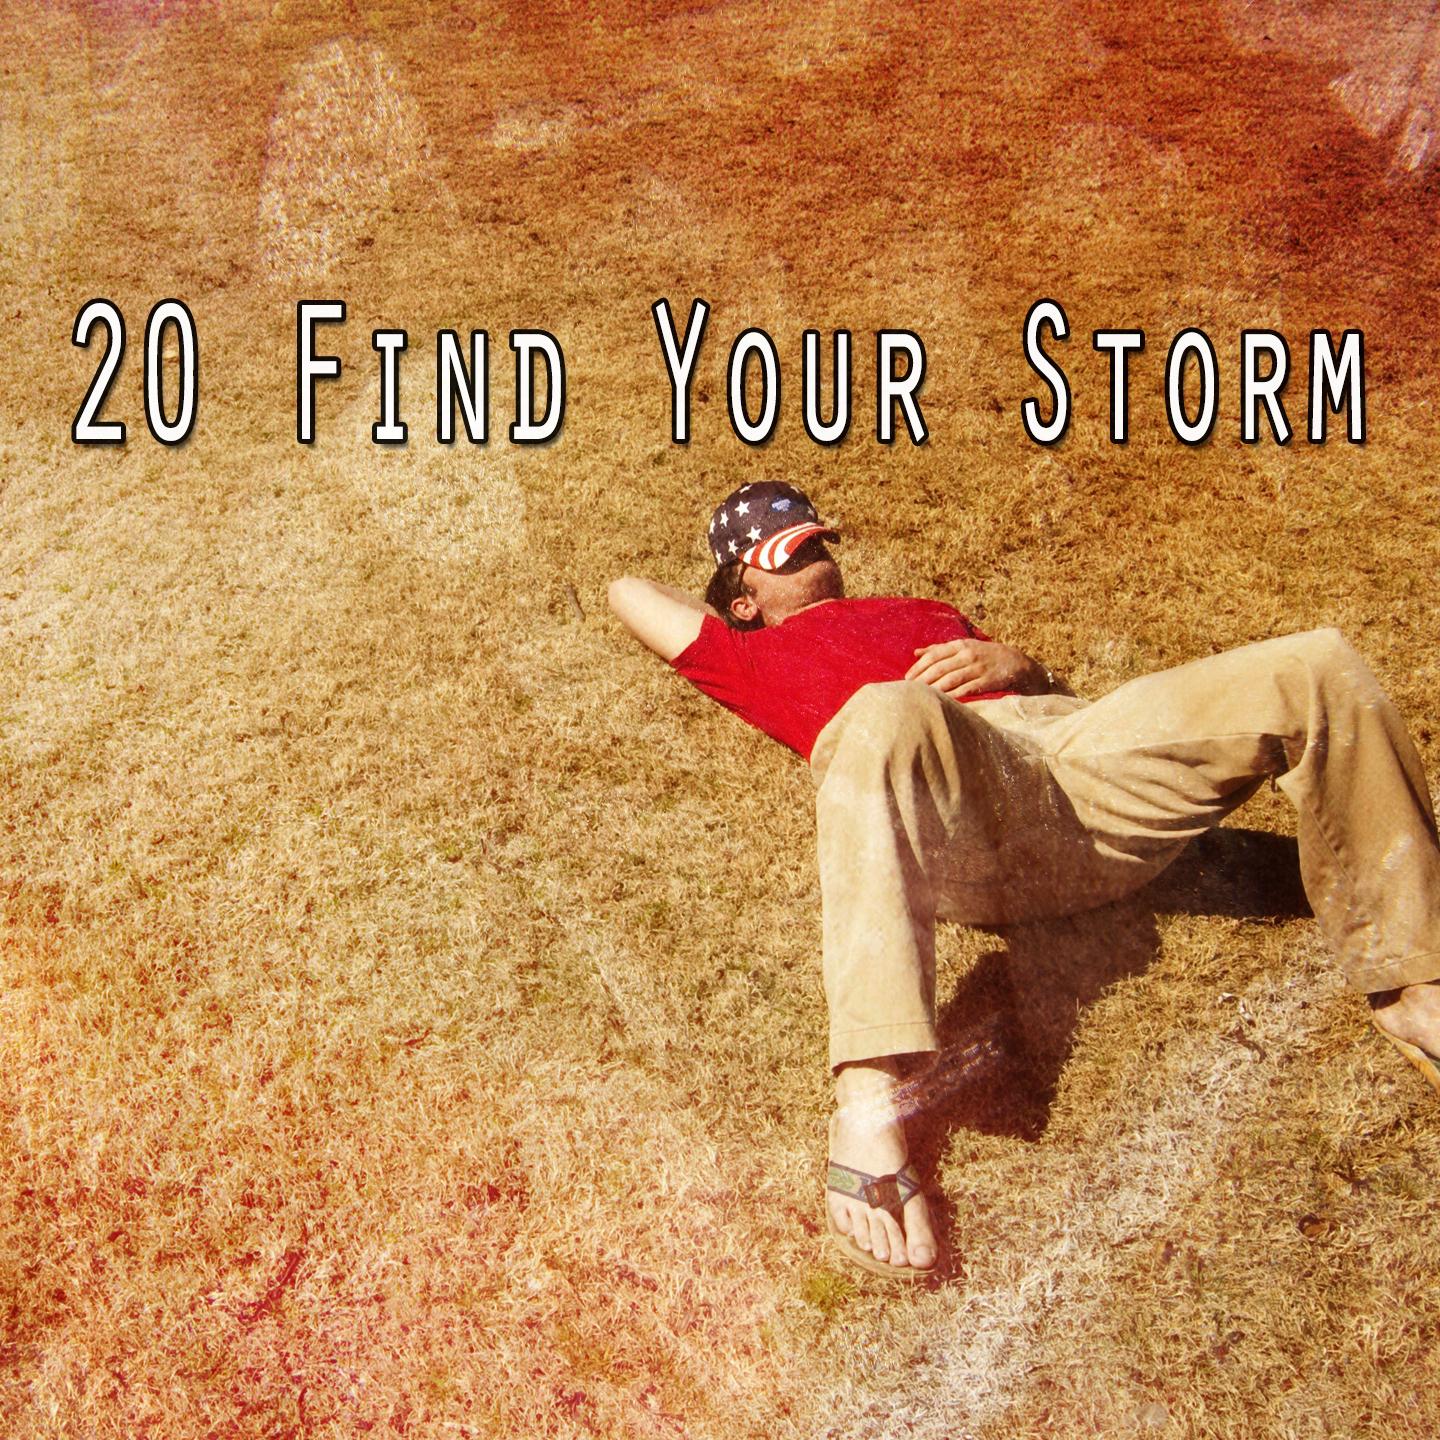 20 Find Your Storm